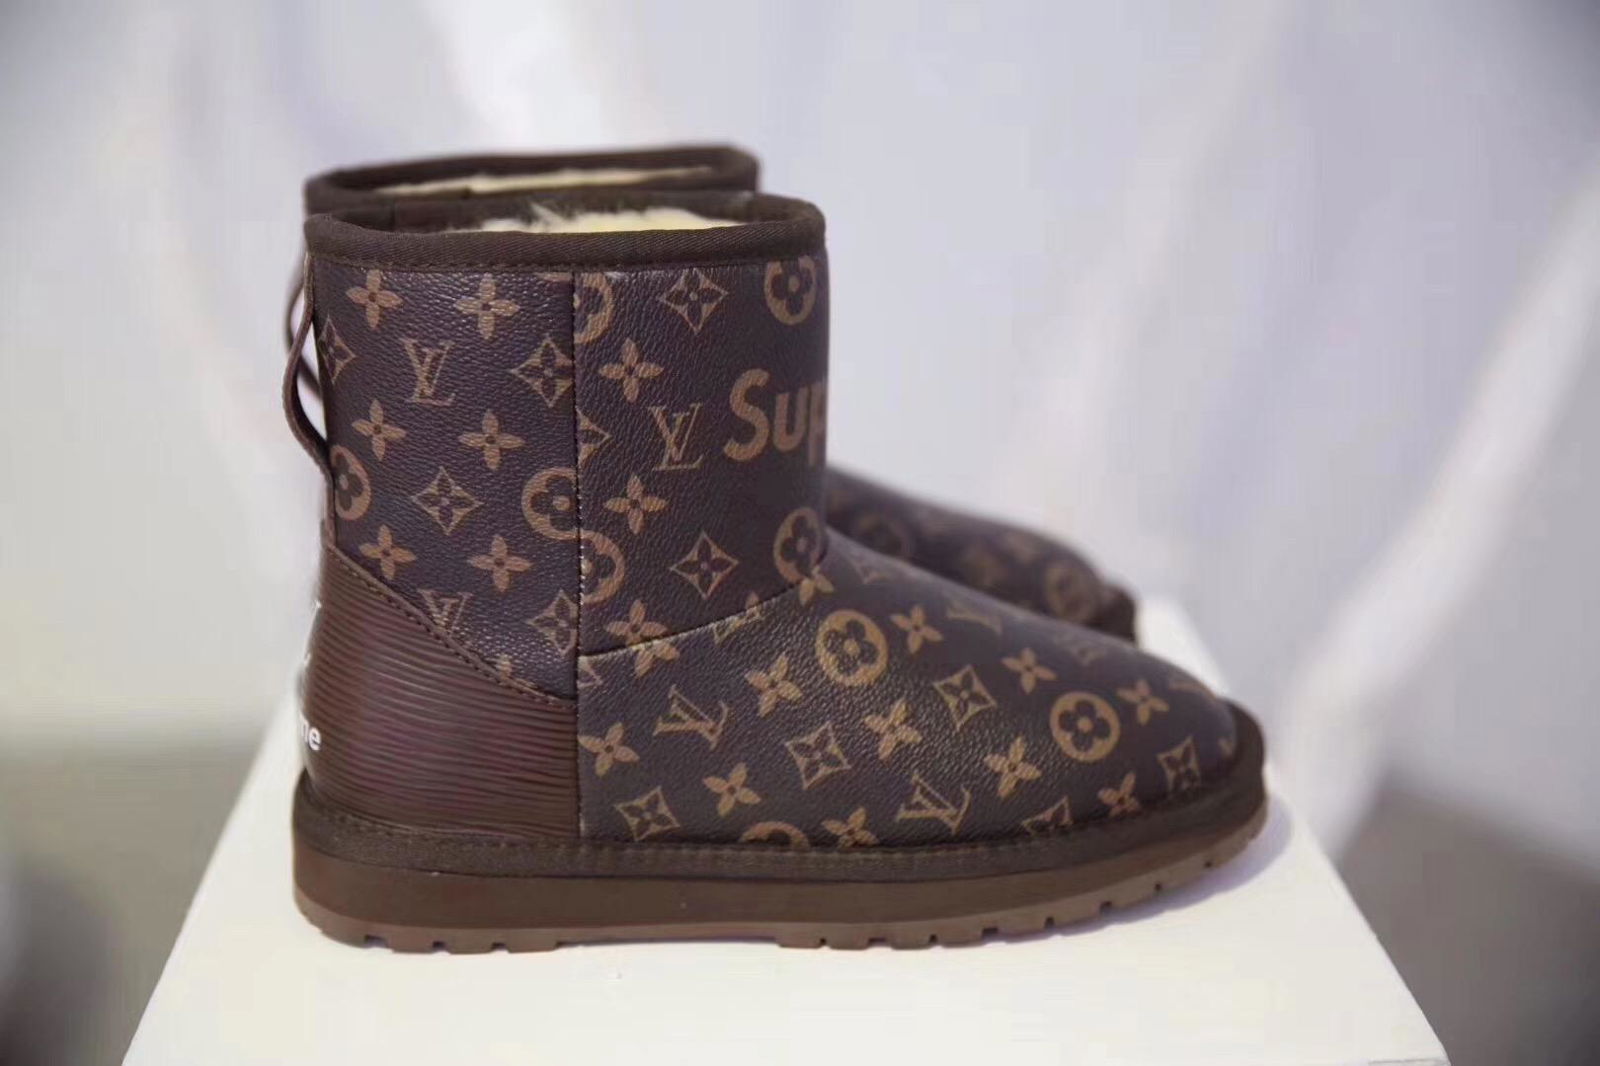 Cheap LOUIS VUITTON boots for women LV X SUPREME Shoes LV shoes for women (China Trading Company ...